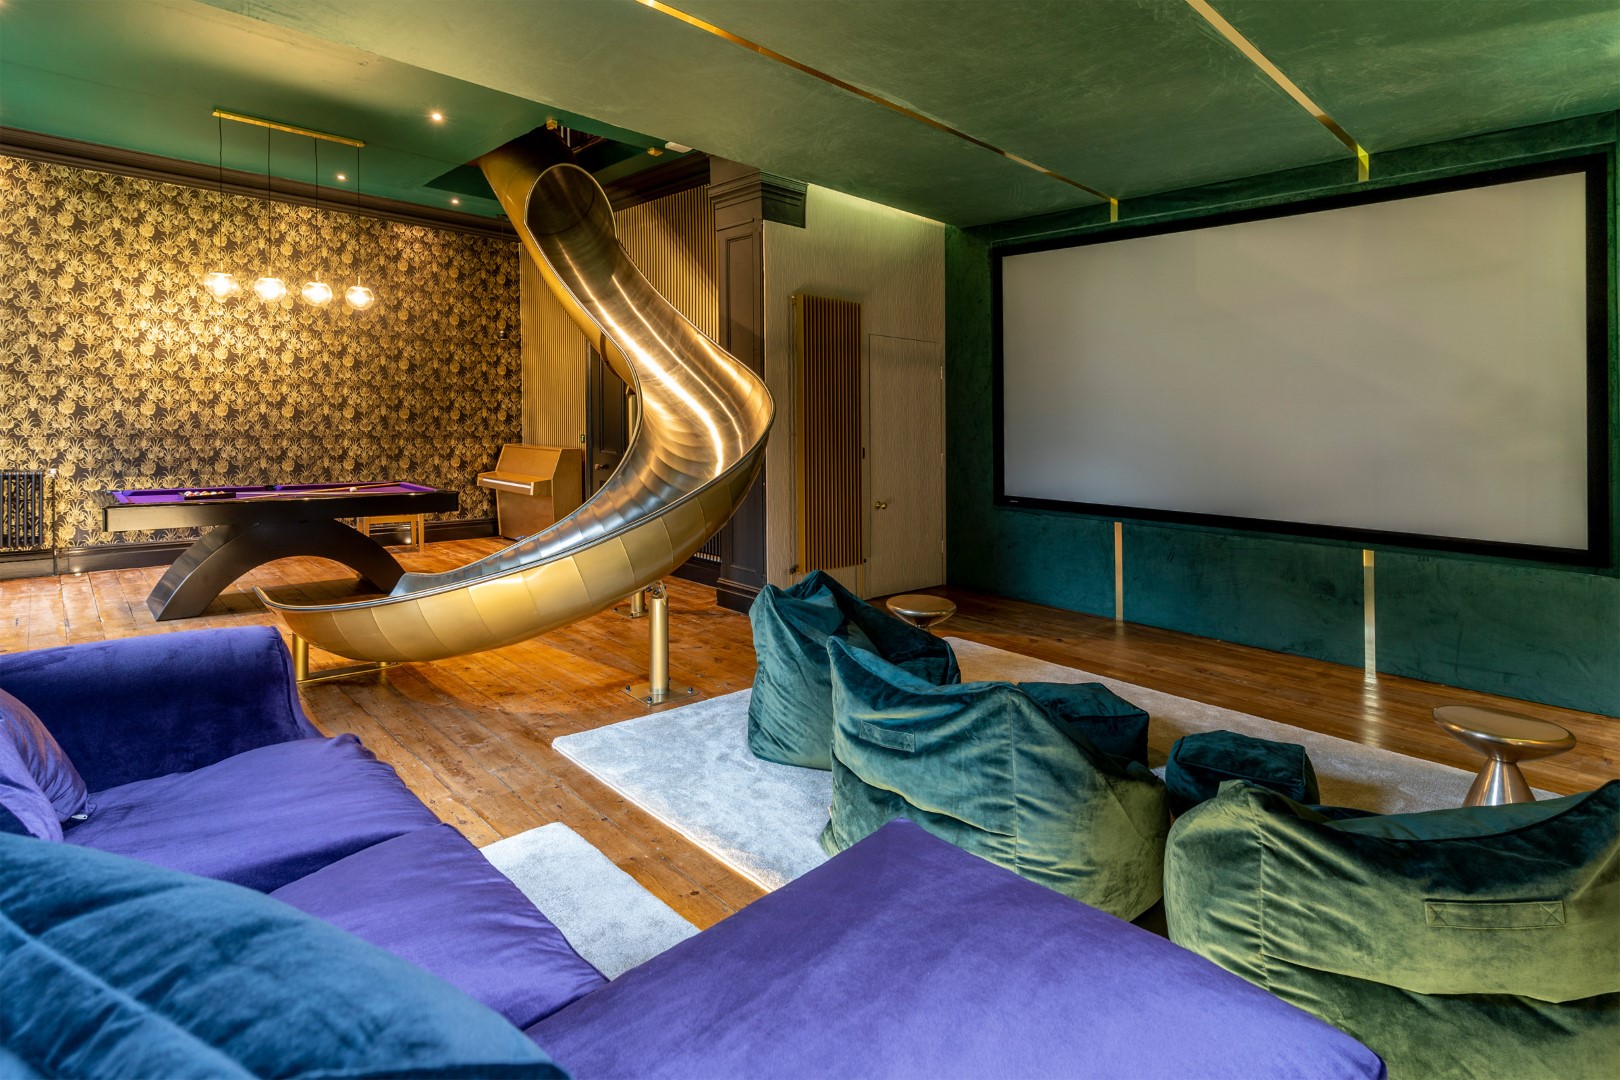 16 Deluxe Contemporary Home Theater Designs That Will Make An Impression